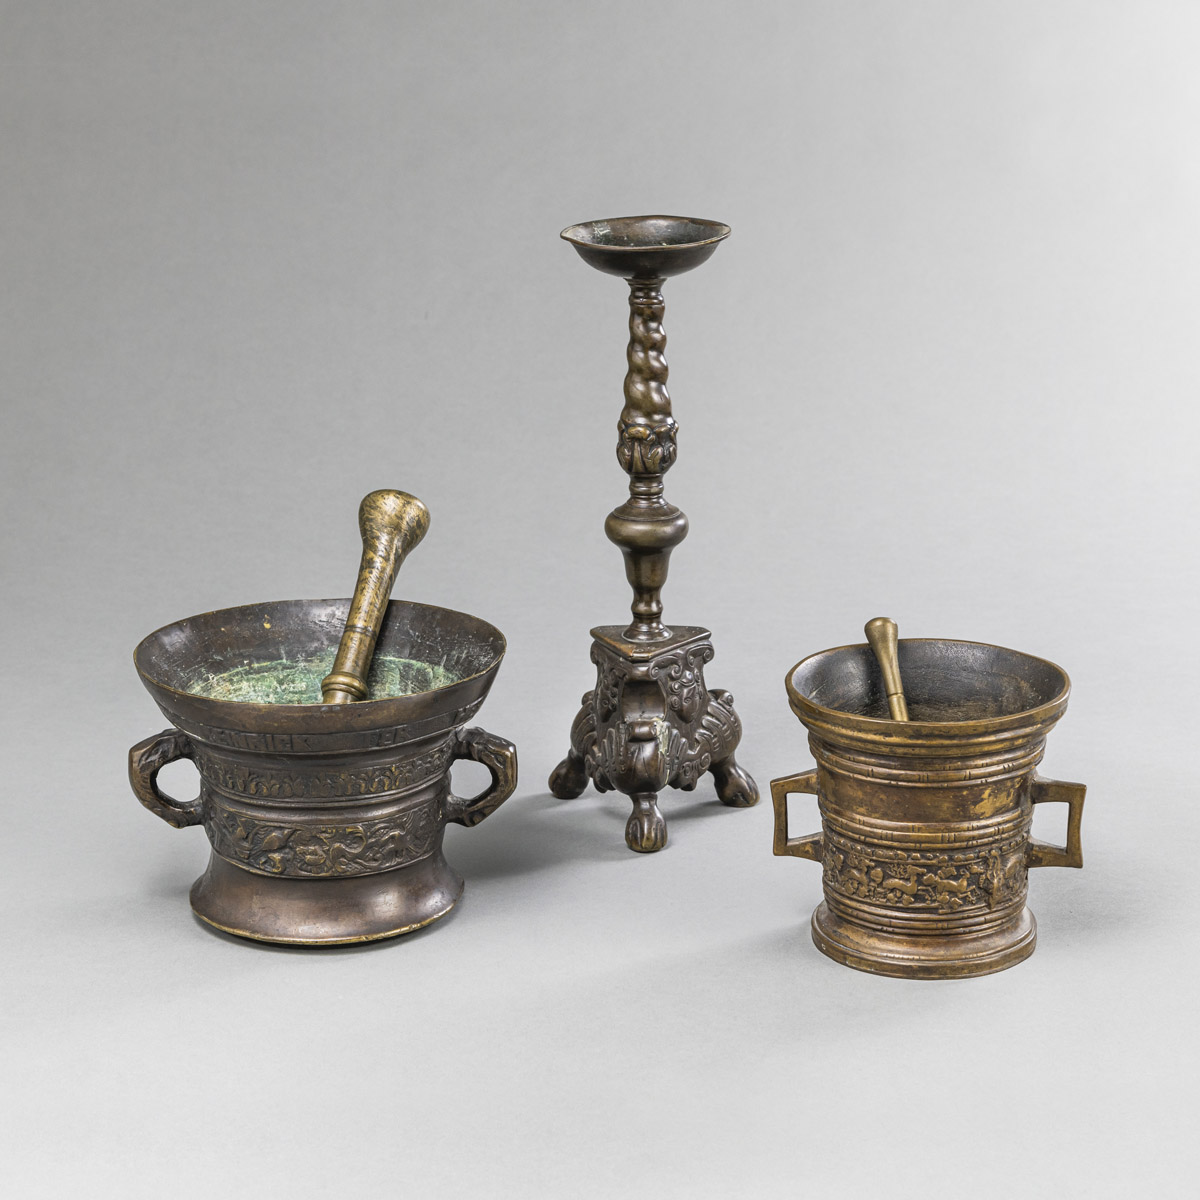 TWO BRONZE MORTARS WITH PESTLES AND A CANDLESTICK